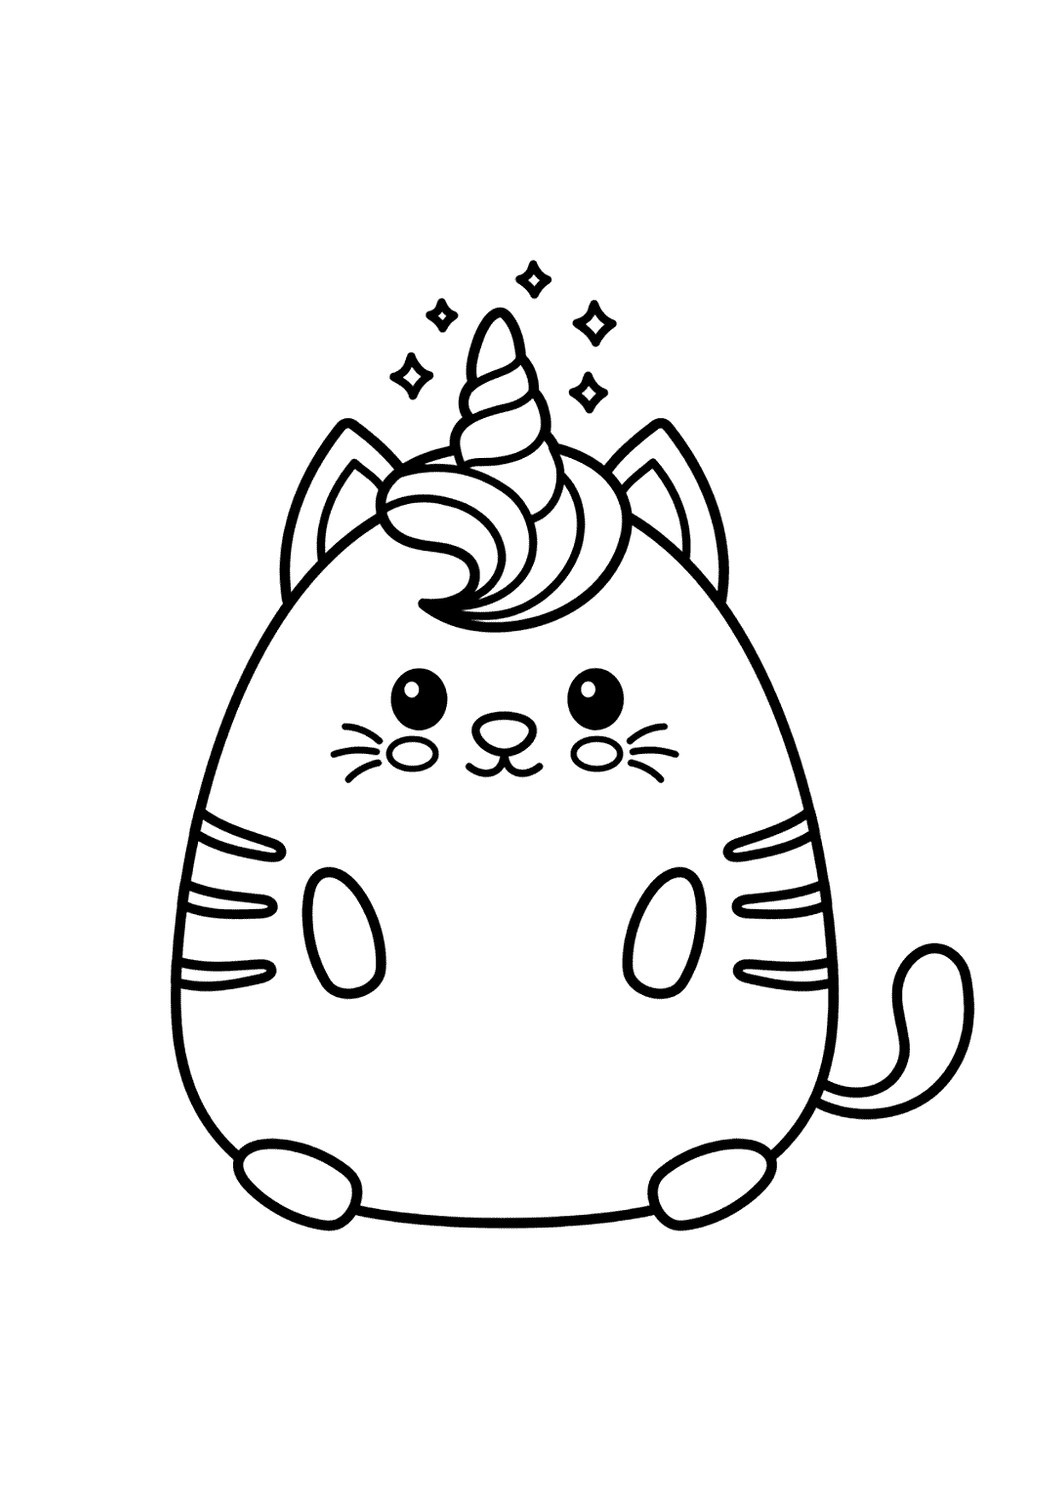 Cute Unicorn Cat Coloring Page   Coloring Home